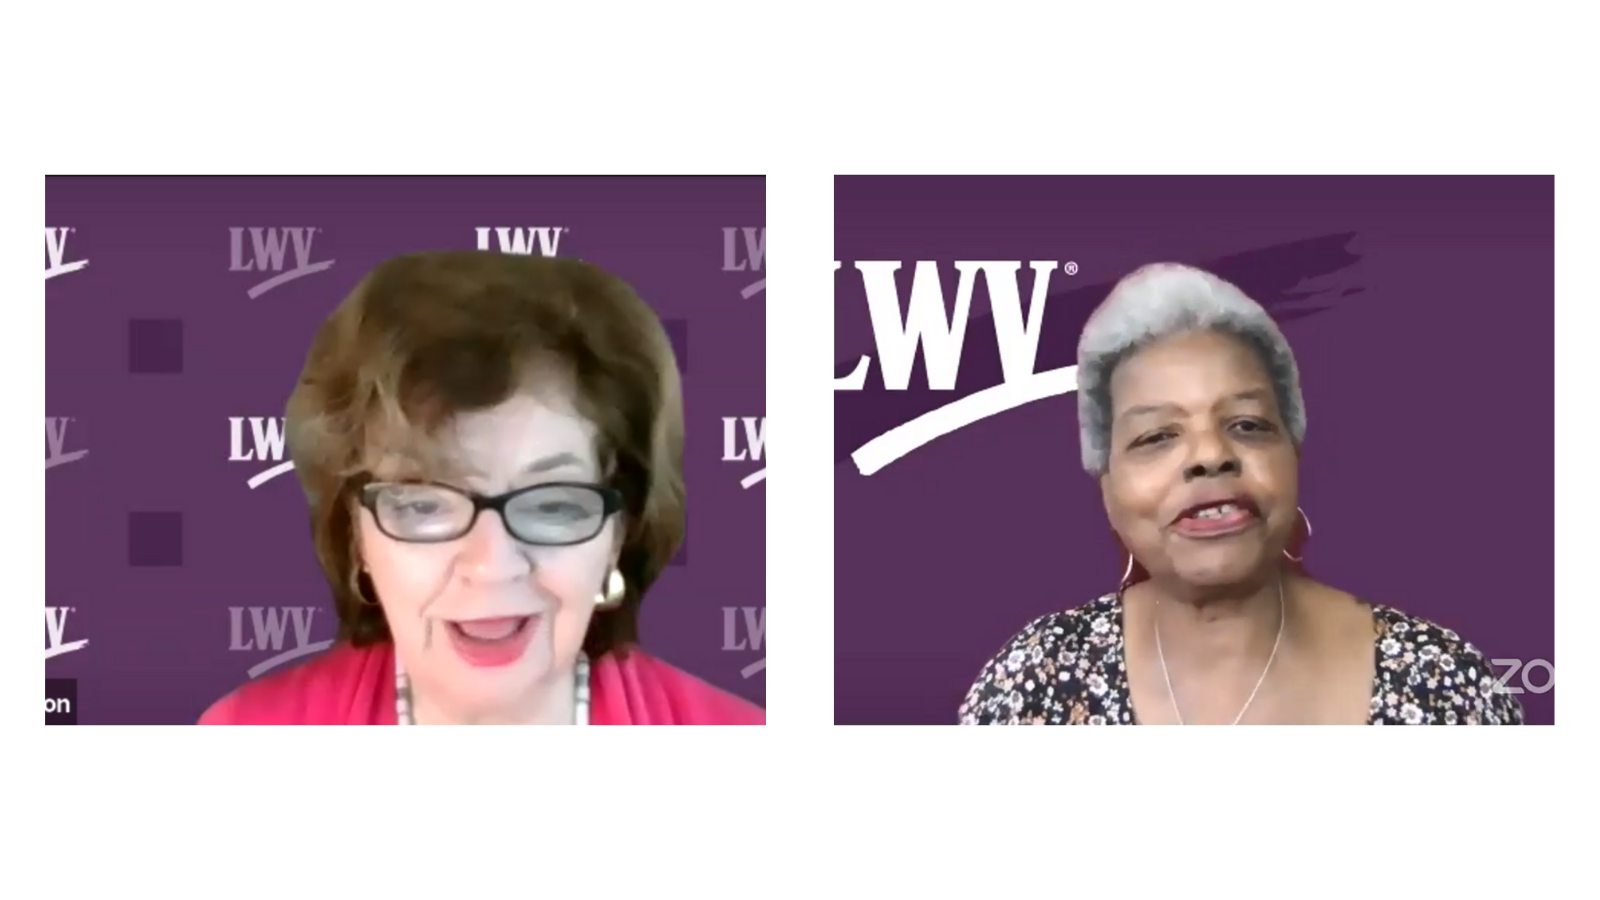 (L): Former LWVUS president Chris Carson on Zoom. They are using a purple LWV zoom background. (R): Current LWVUS president Deborah Turner on Zoom. They are using a purple LWV background